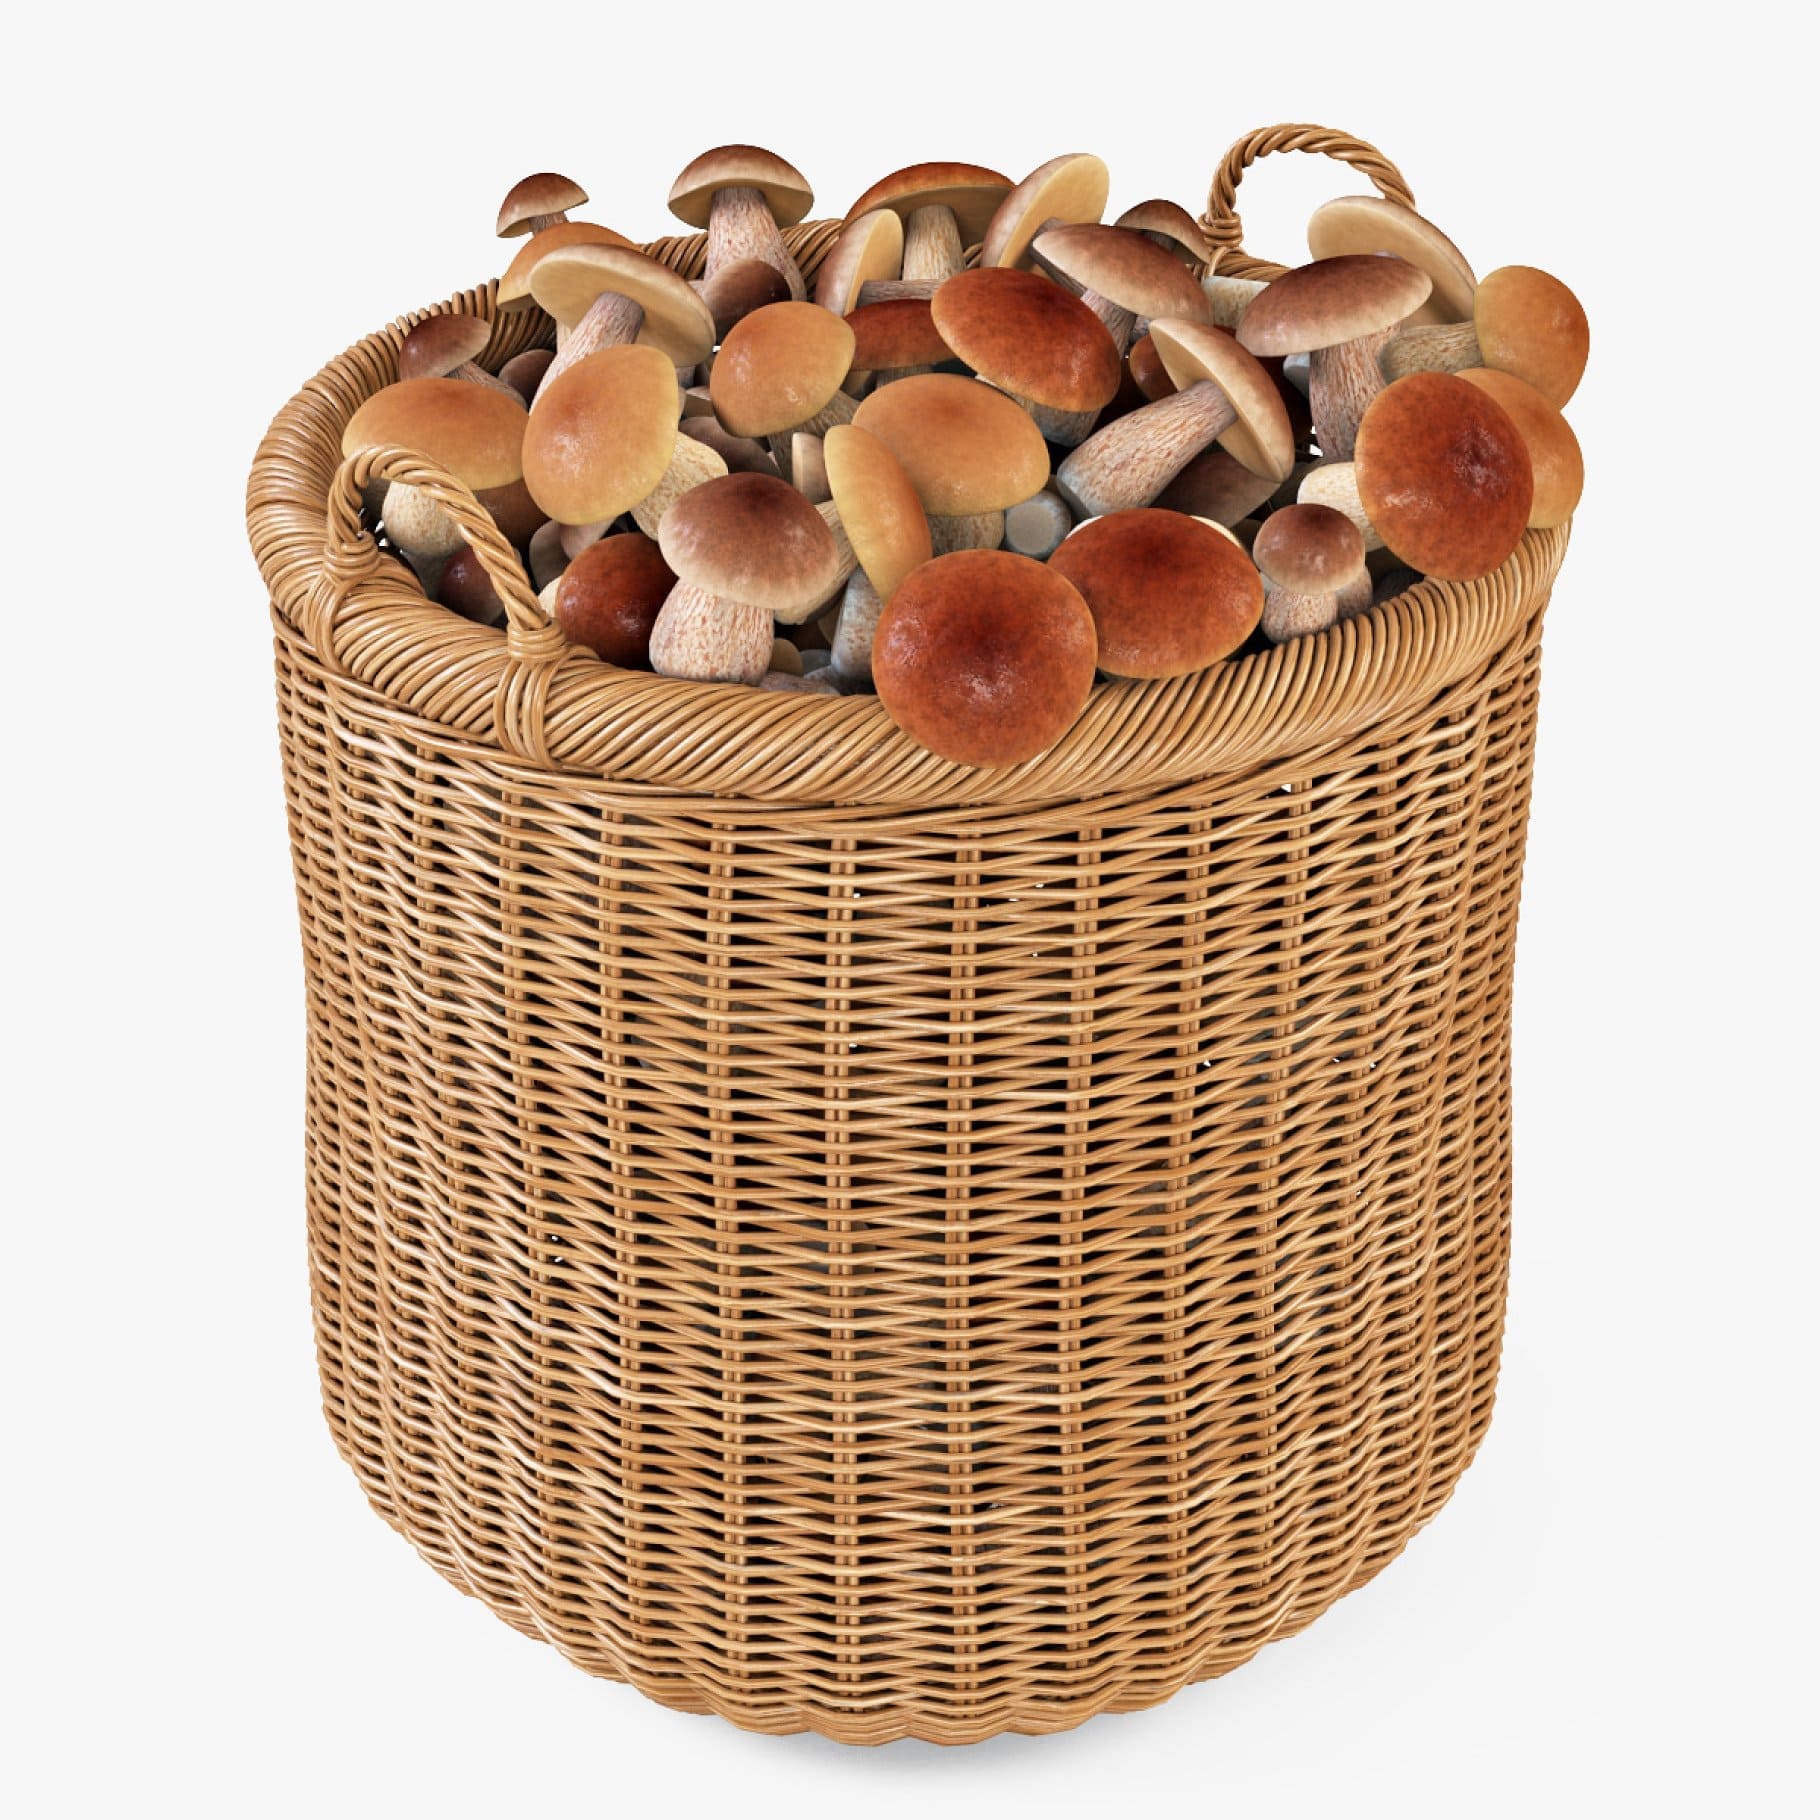 A basket with mushrooms is woven from a thin vine.